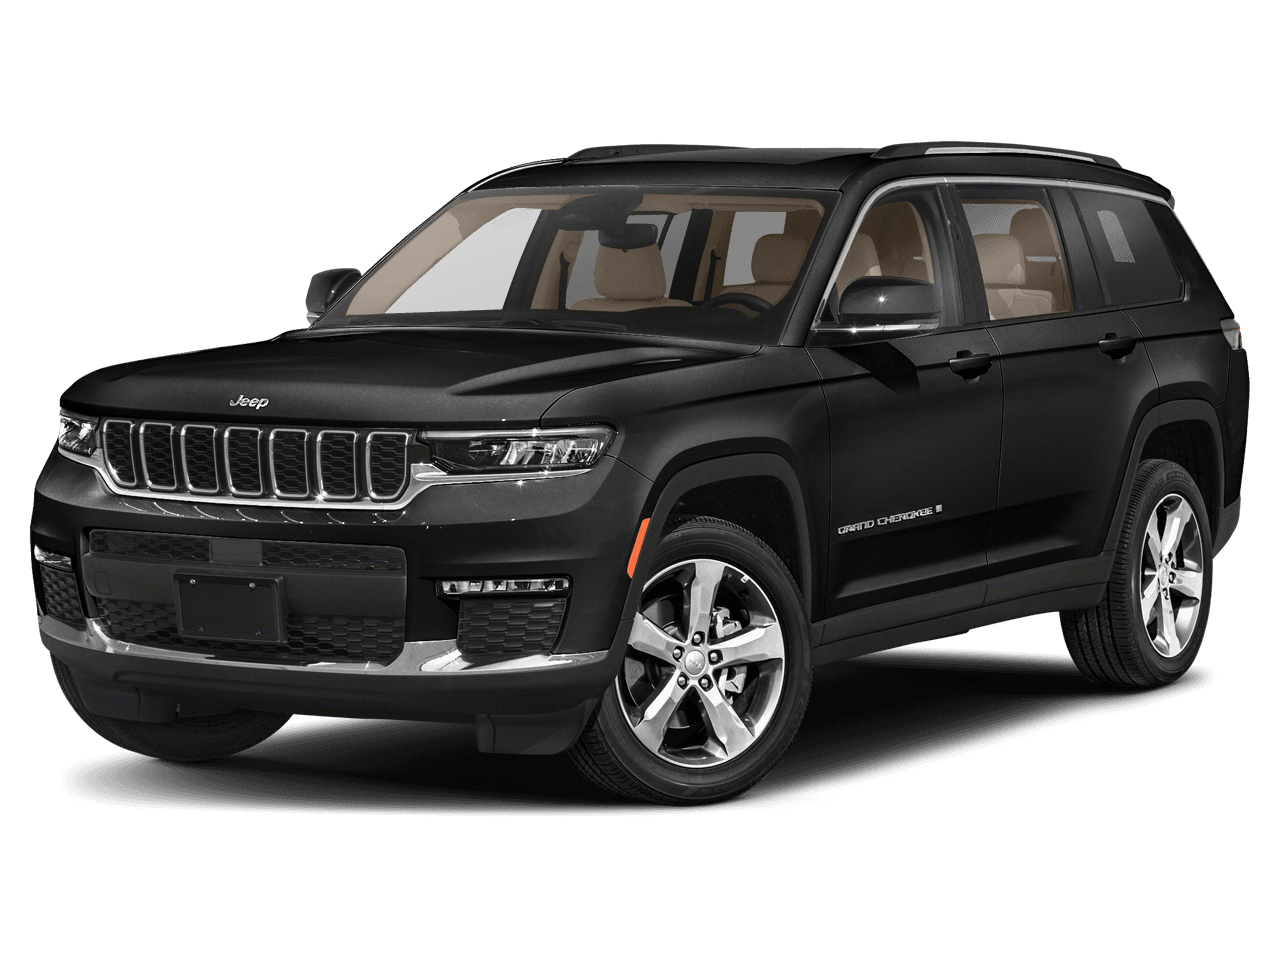 2021 Jeep Grand Cherokee L Photo in Wooster, OH 44691